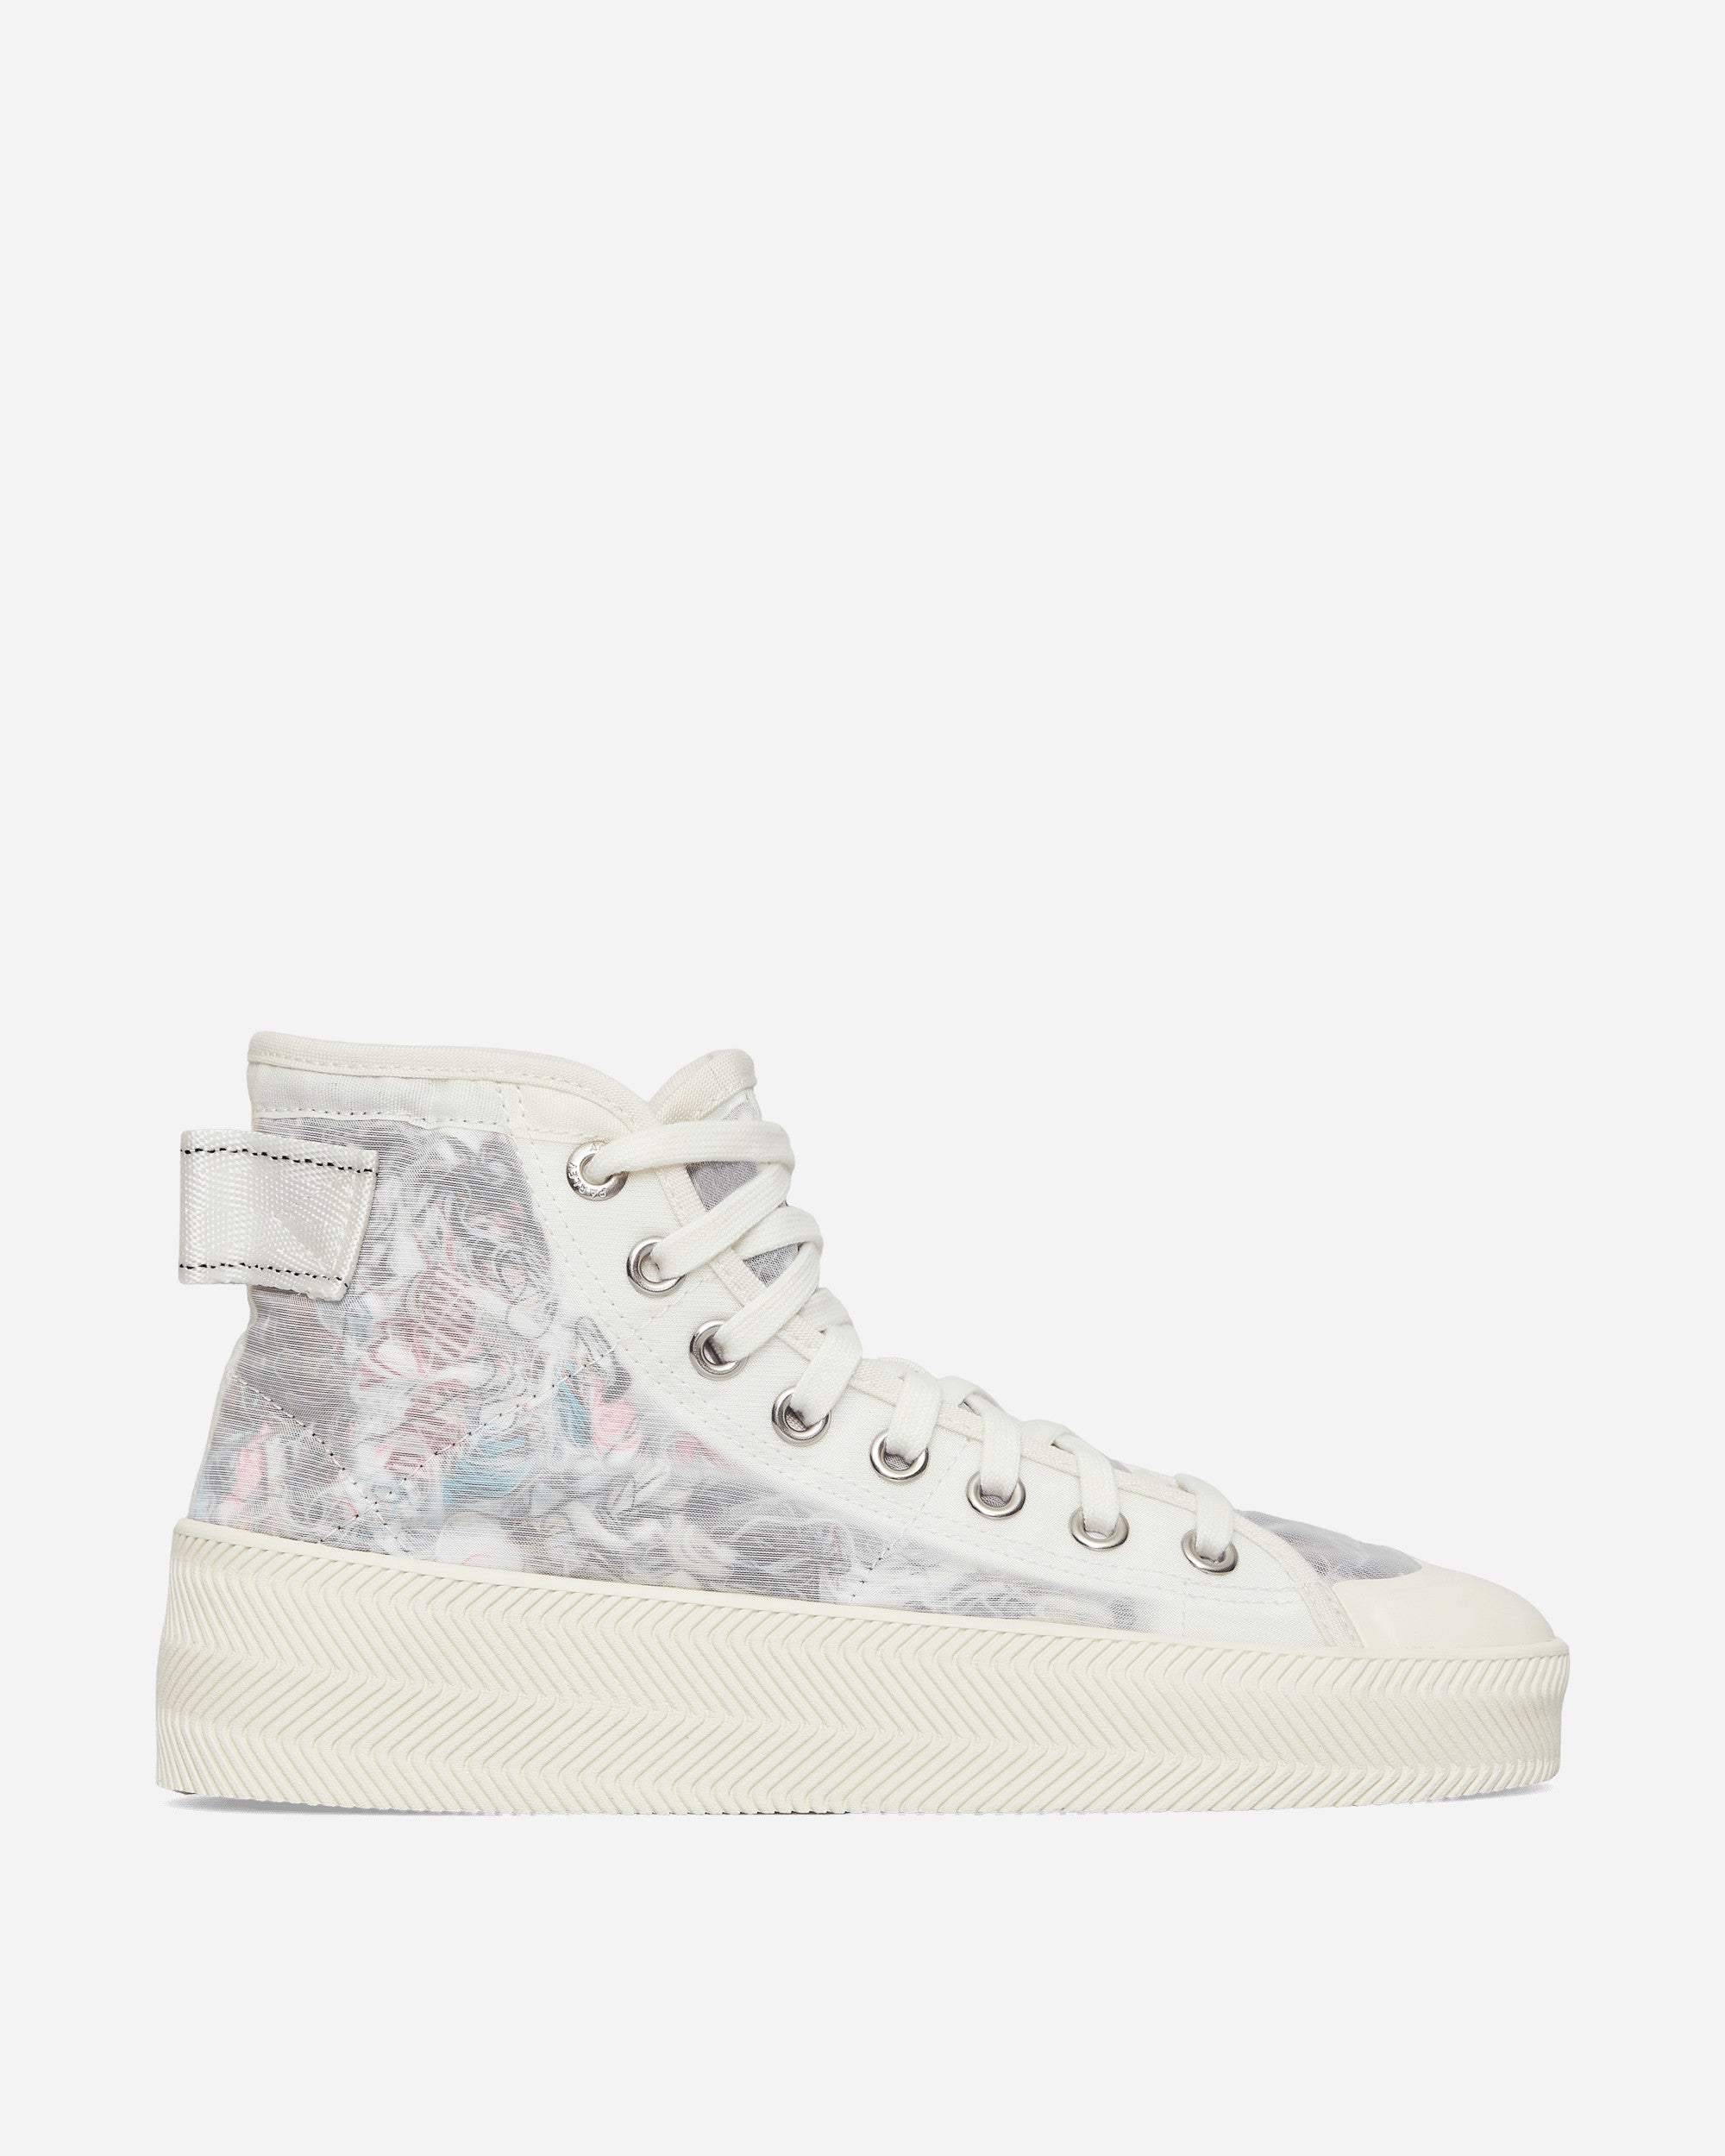 adidas Originals Nizza Parley Hi Core White Sneakers High GY3176